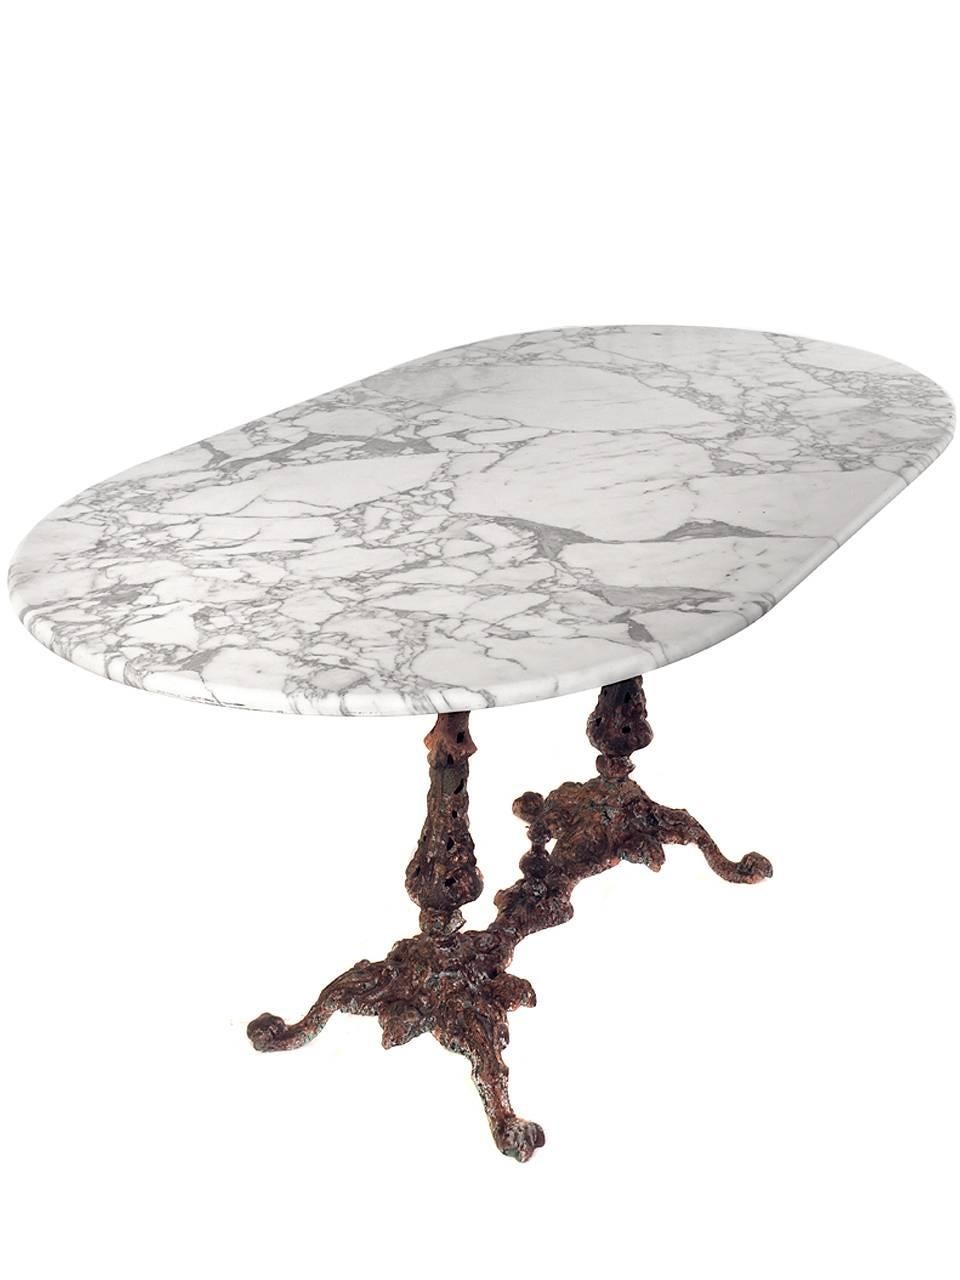 American 1800s Marble Table with Fiske Cast Iron Base